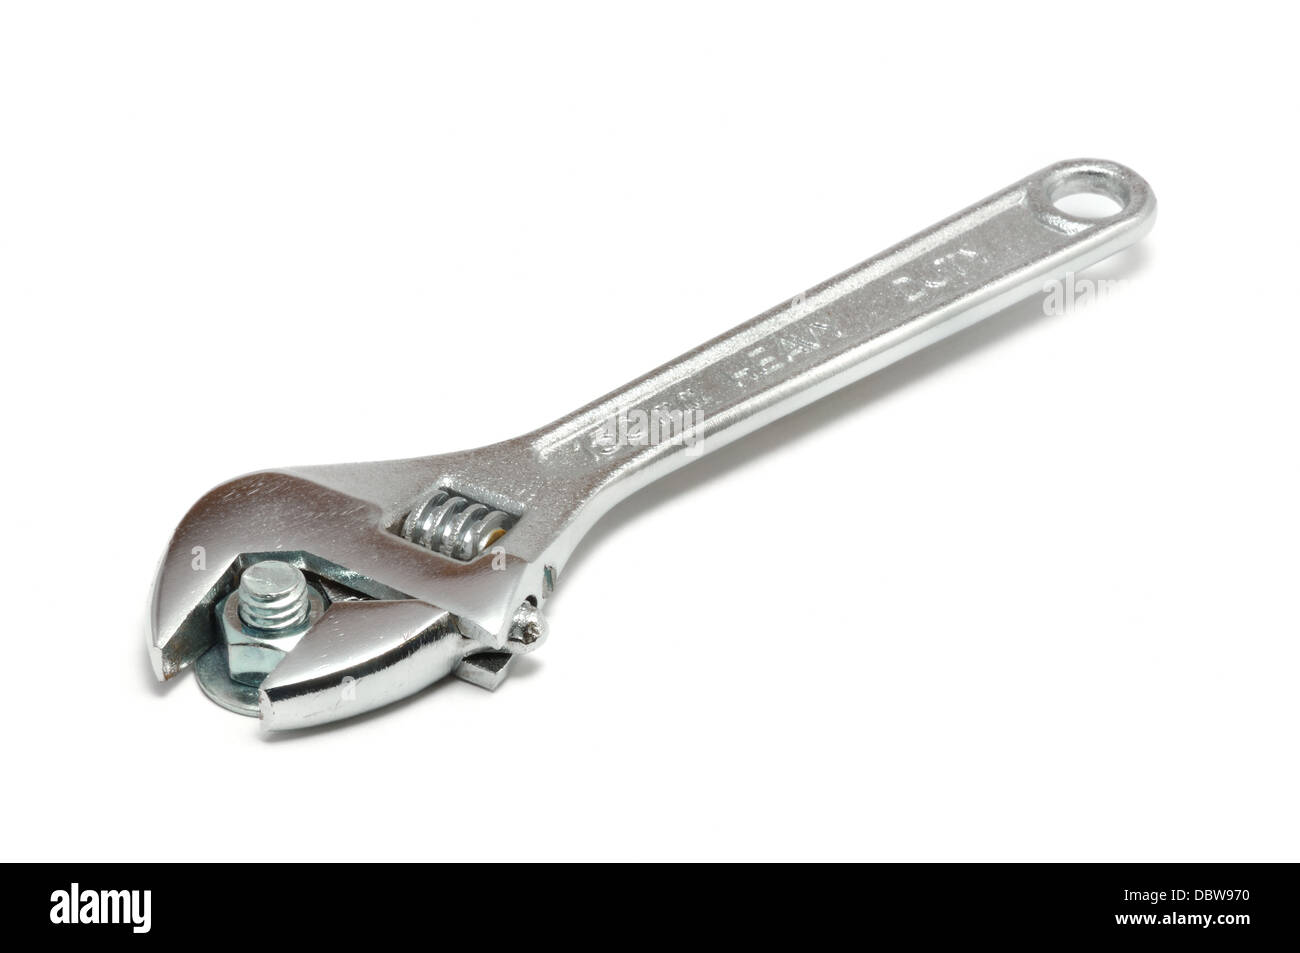 Spanner / wrench on white background Stock Photo